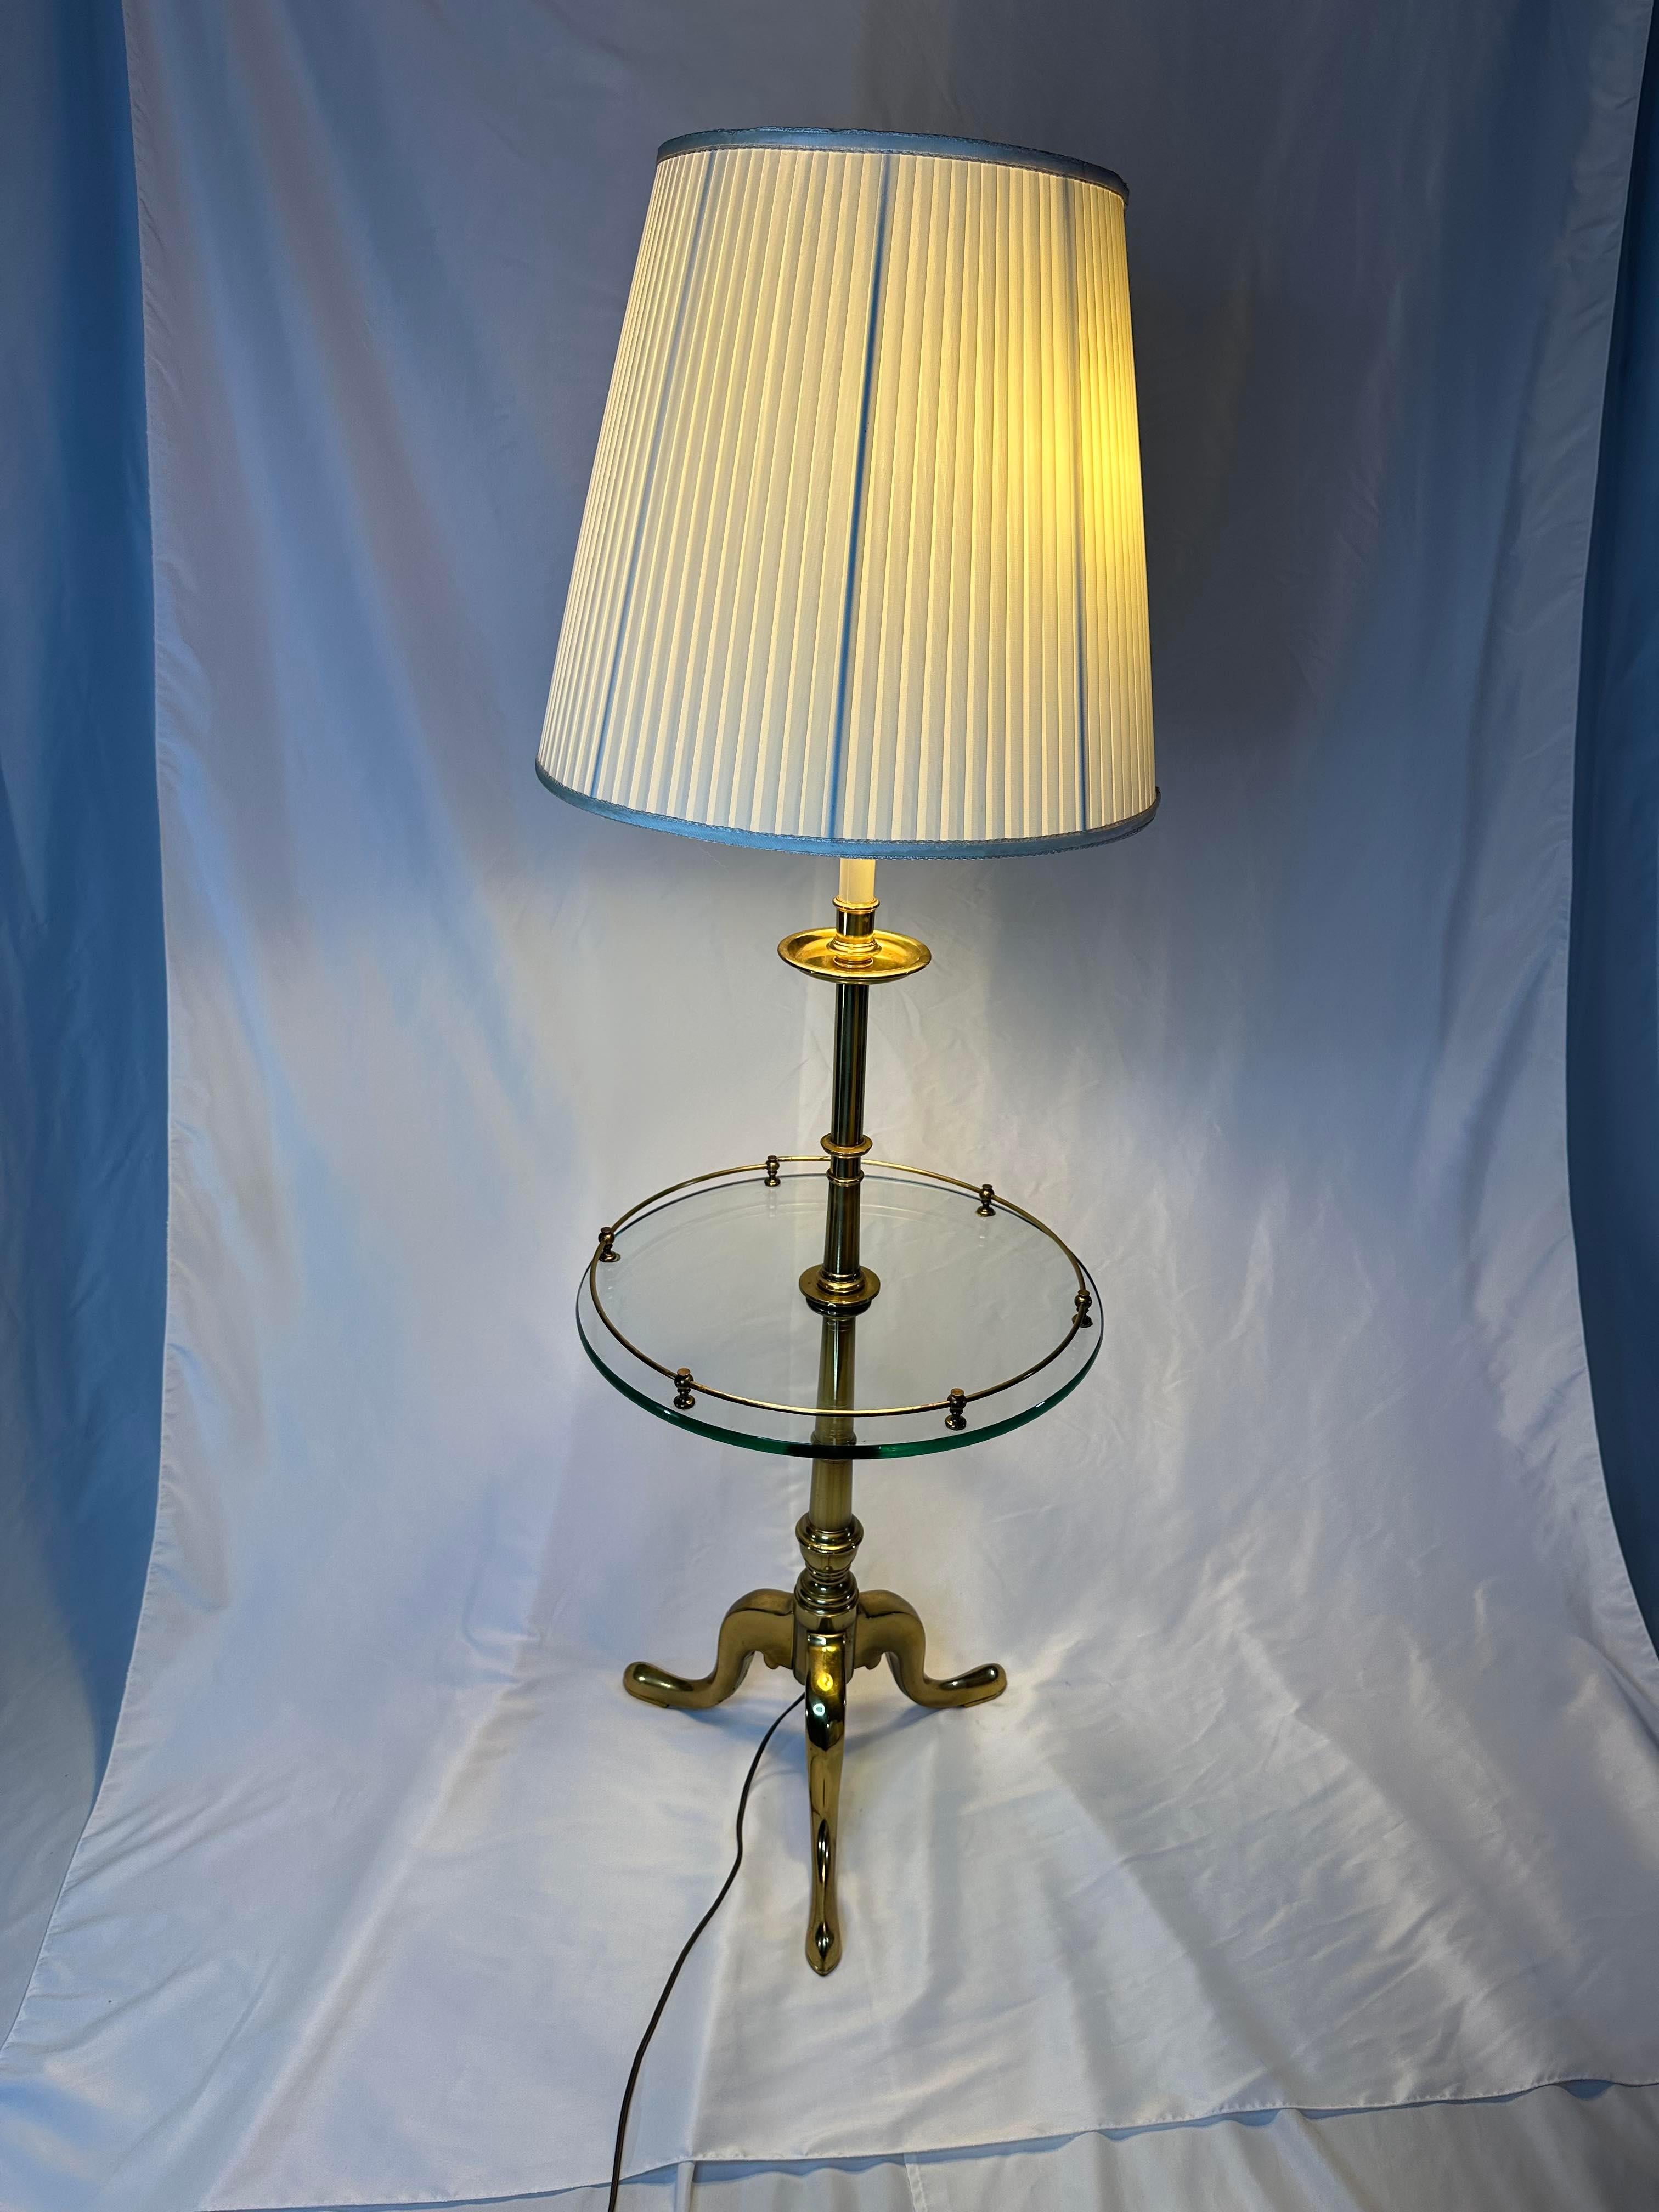 Brass French Provincial Stiffel Floor Lamp With Glass Table and tripod legs